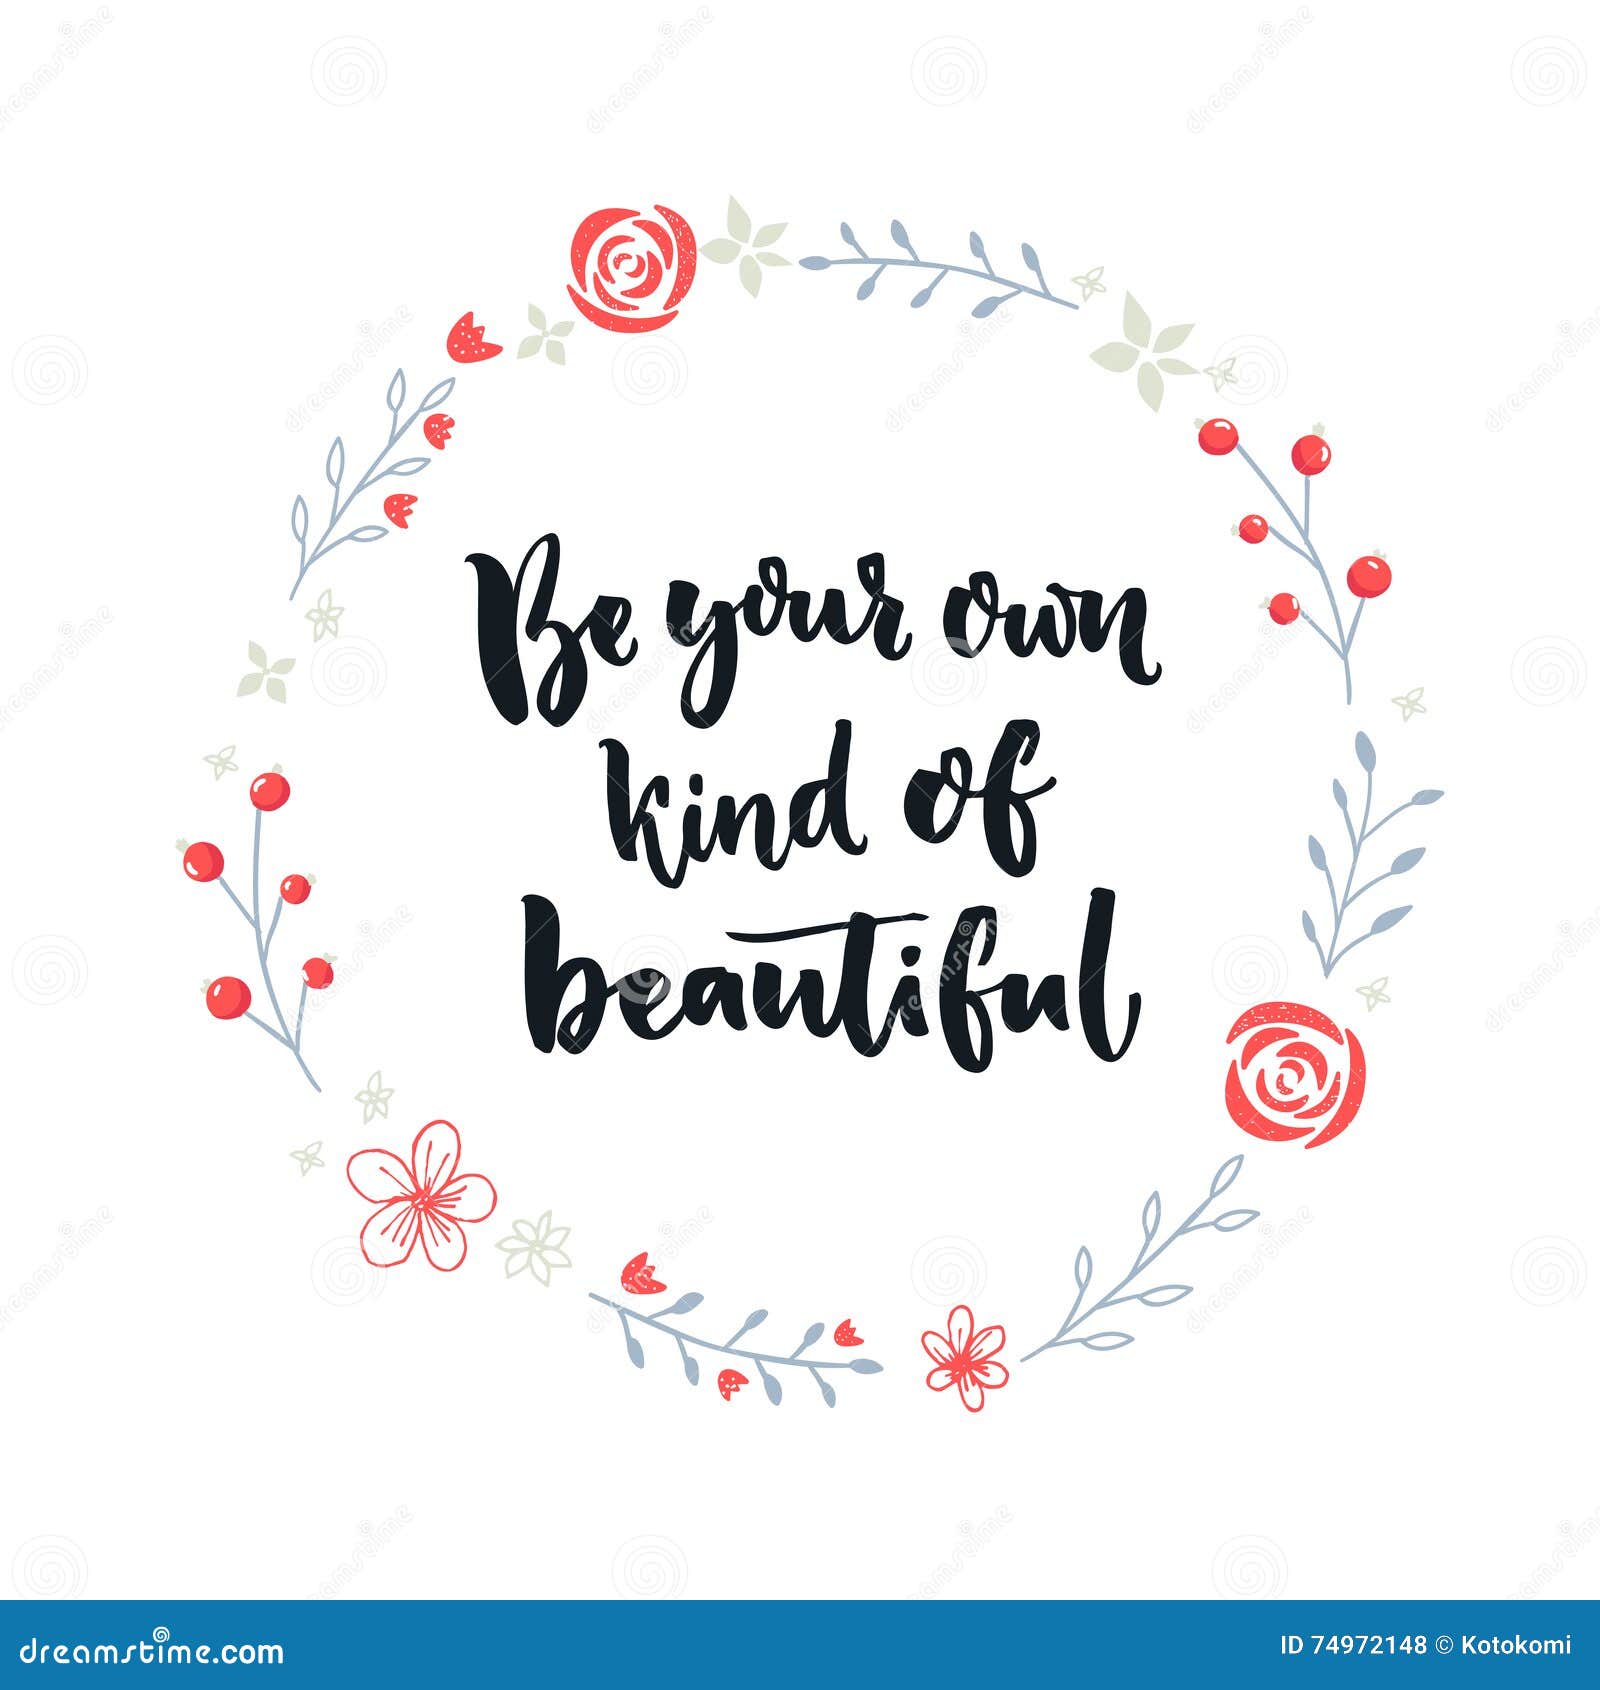 Royalty Free Vector Download Be Your Own Kind Beautiful Inspirational Quote About Self esteem